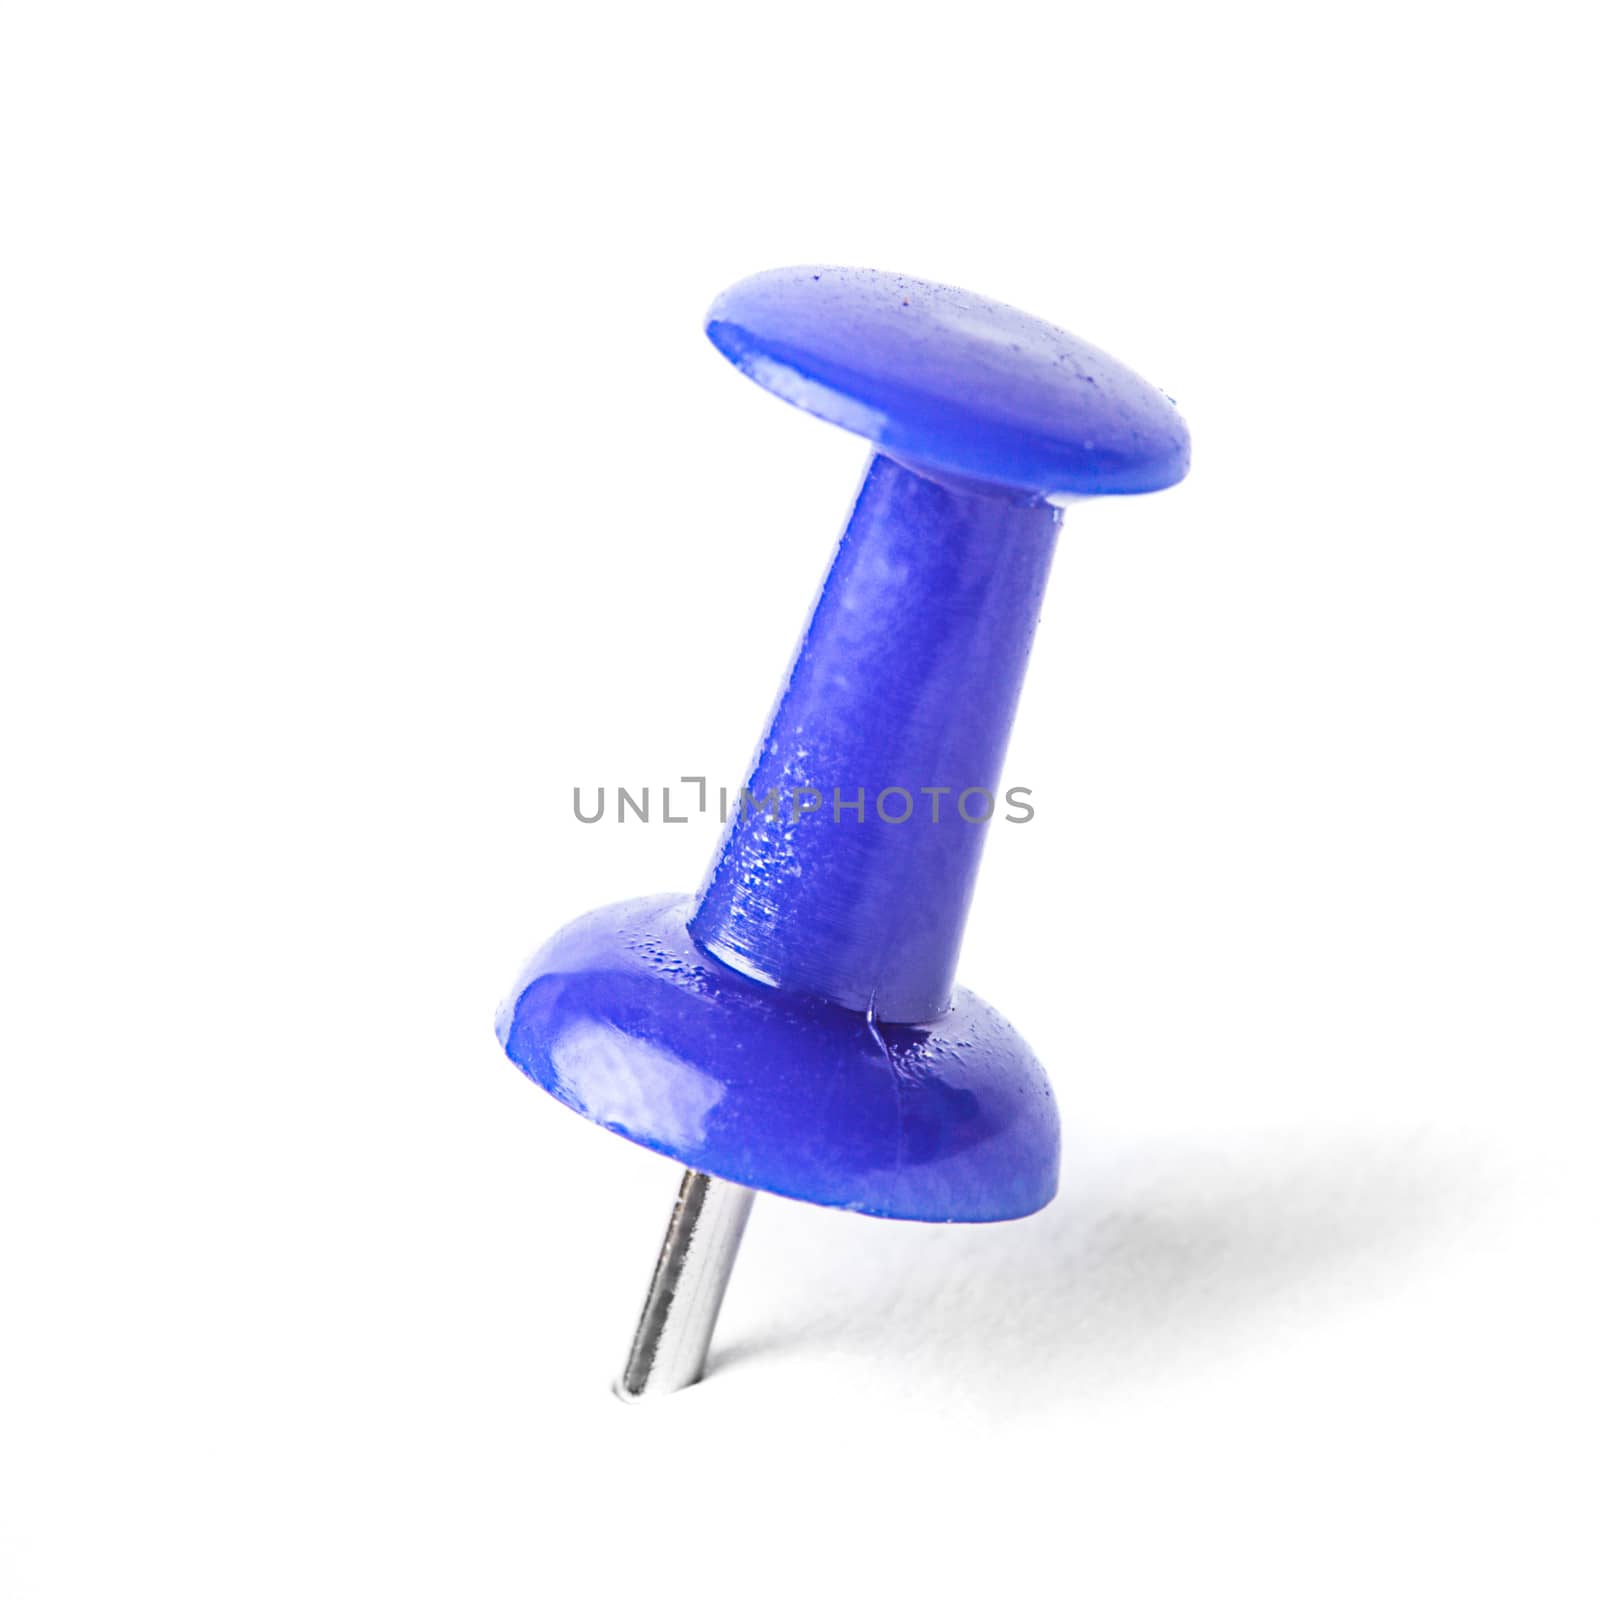 Pushpin attached in on white background isolated